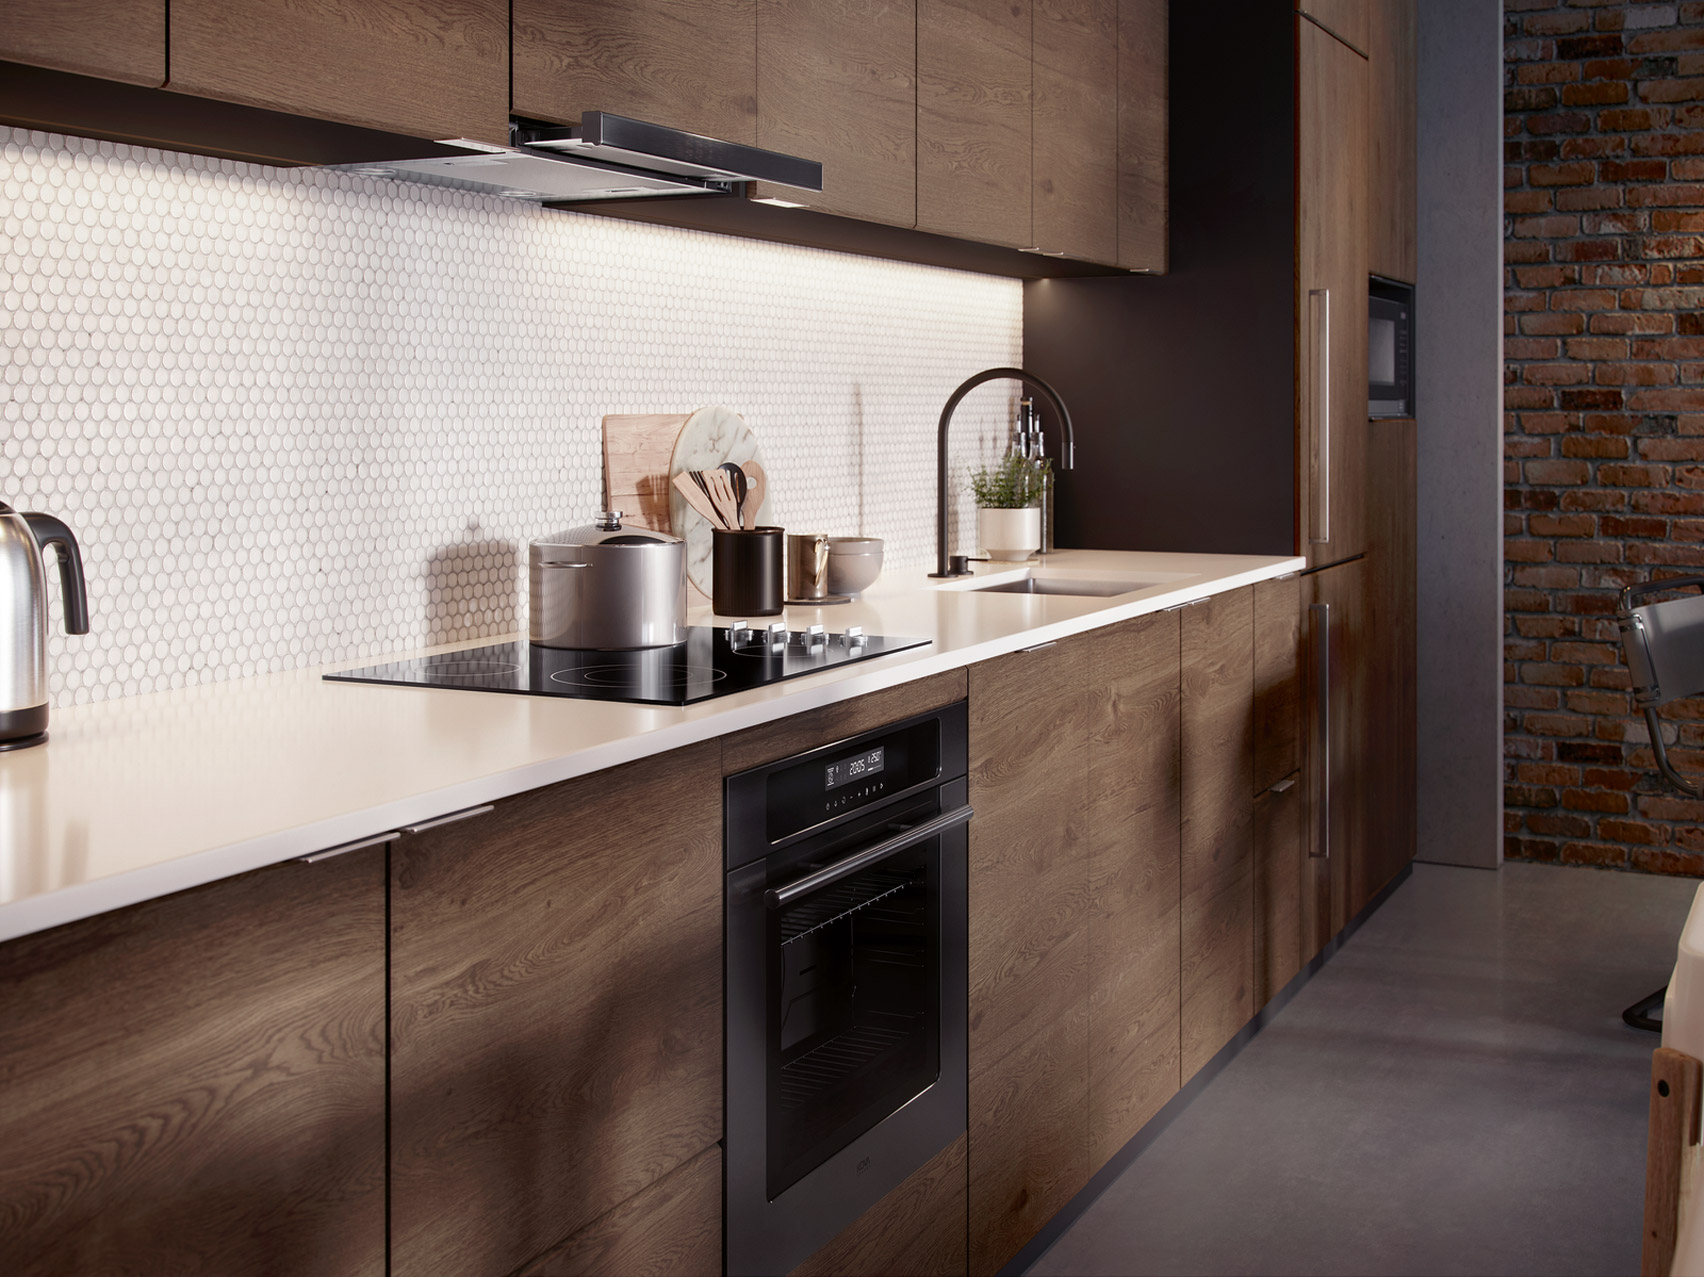 KOVA launches Compact Appliance collection for modern kitchens